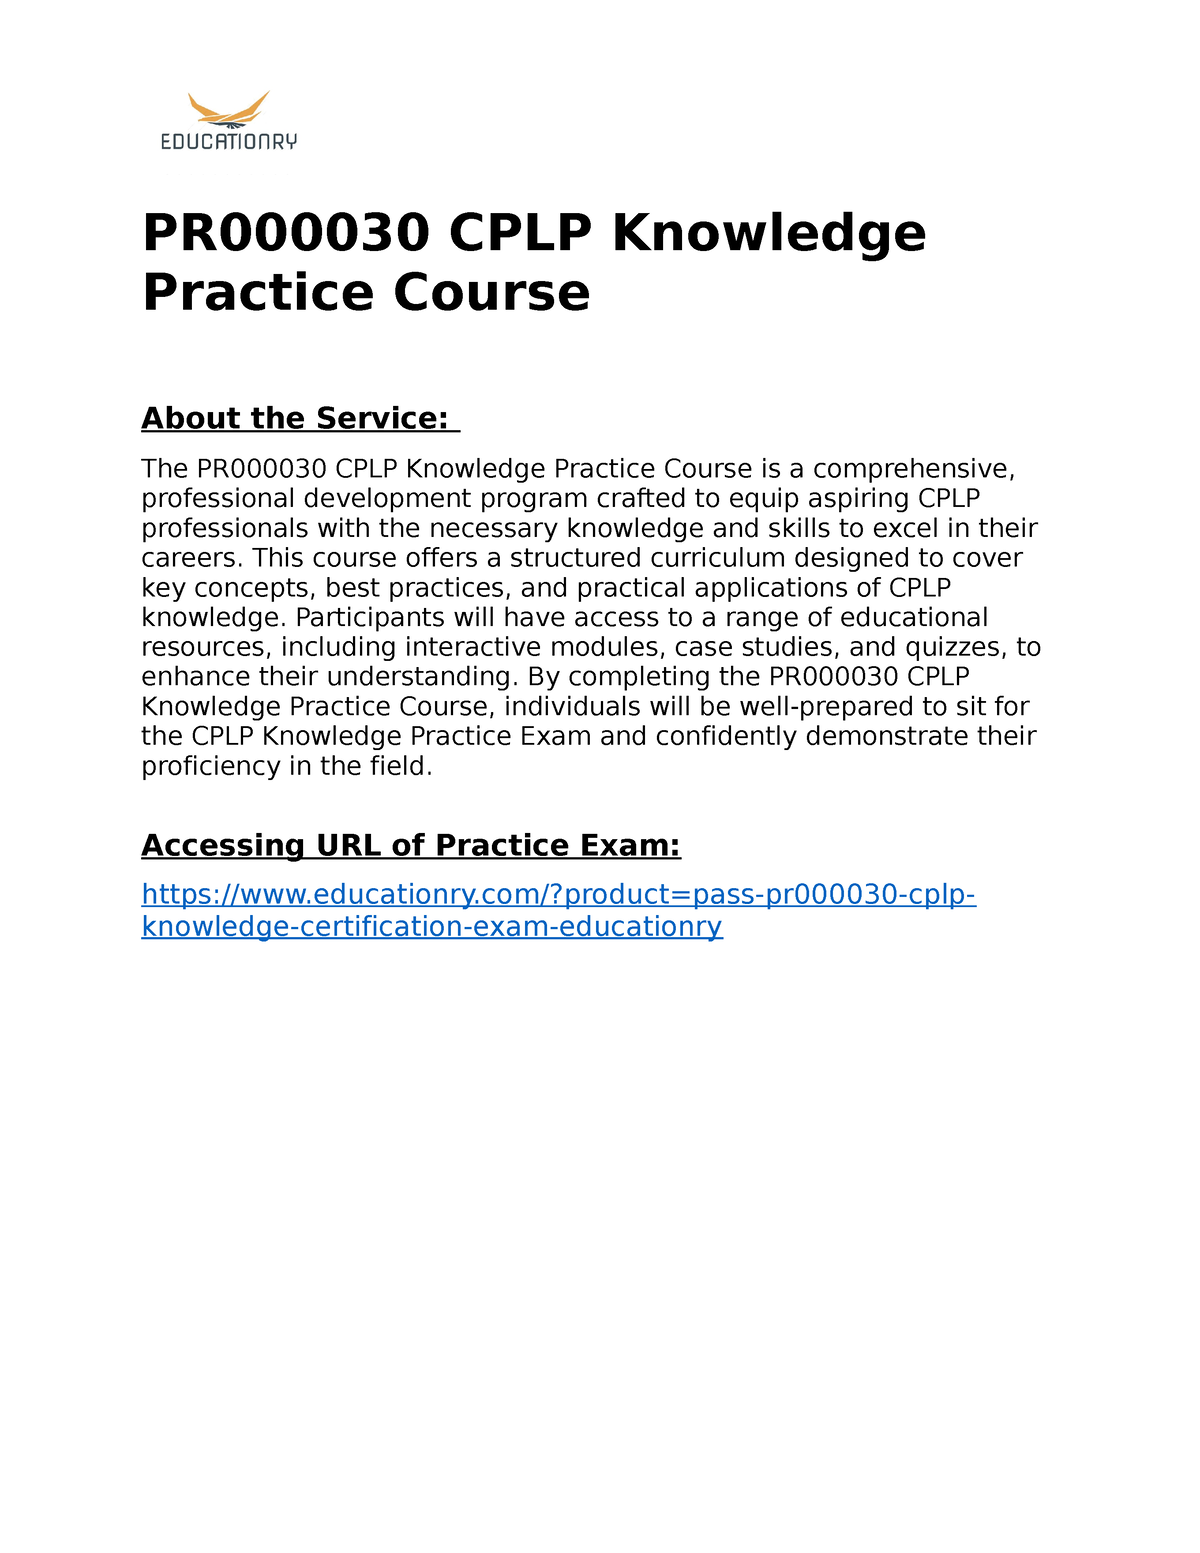 PR000030 CPLP Knowledge Practice Course This course offers a